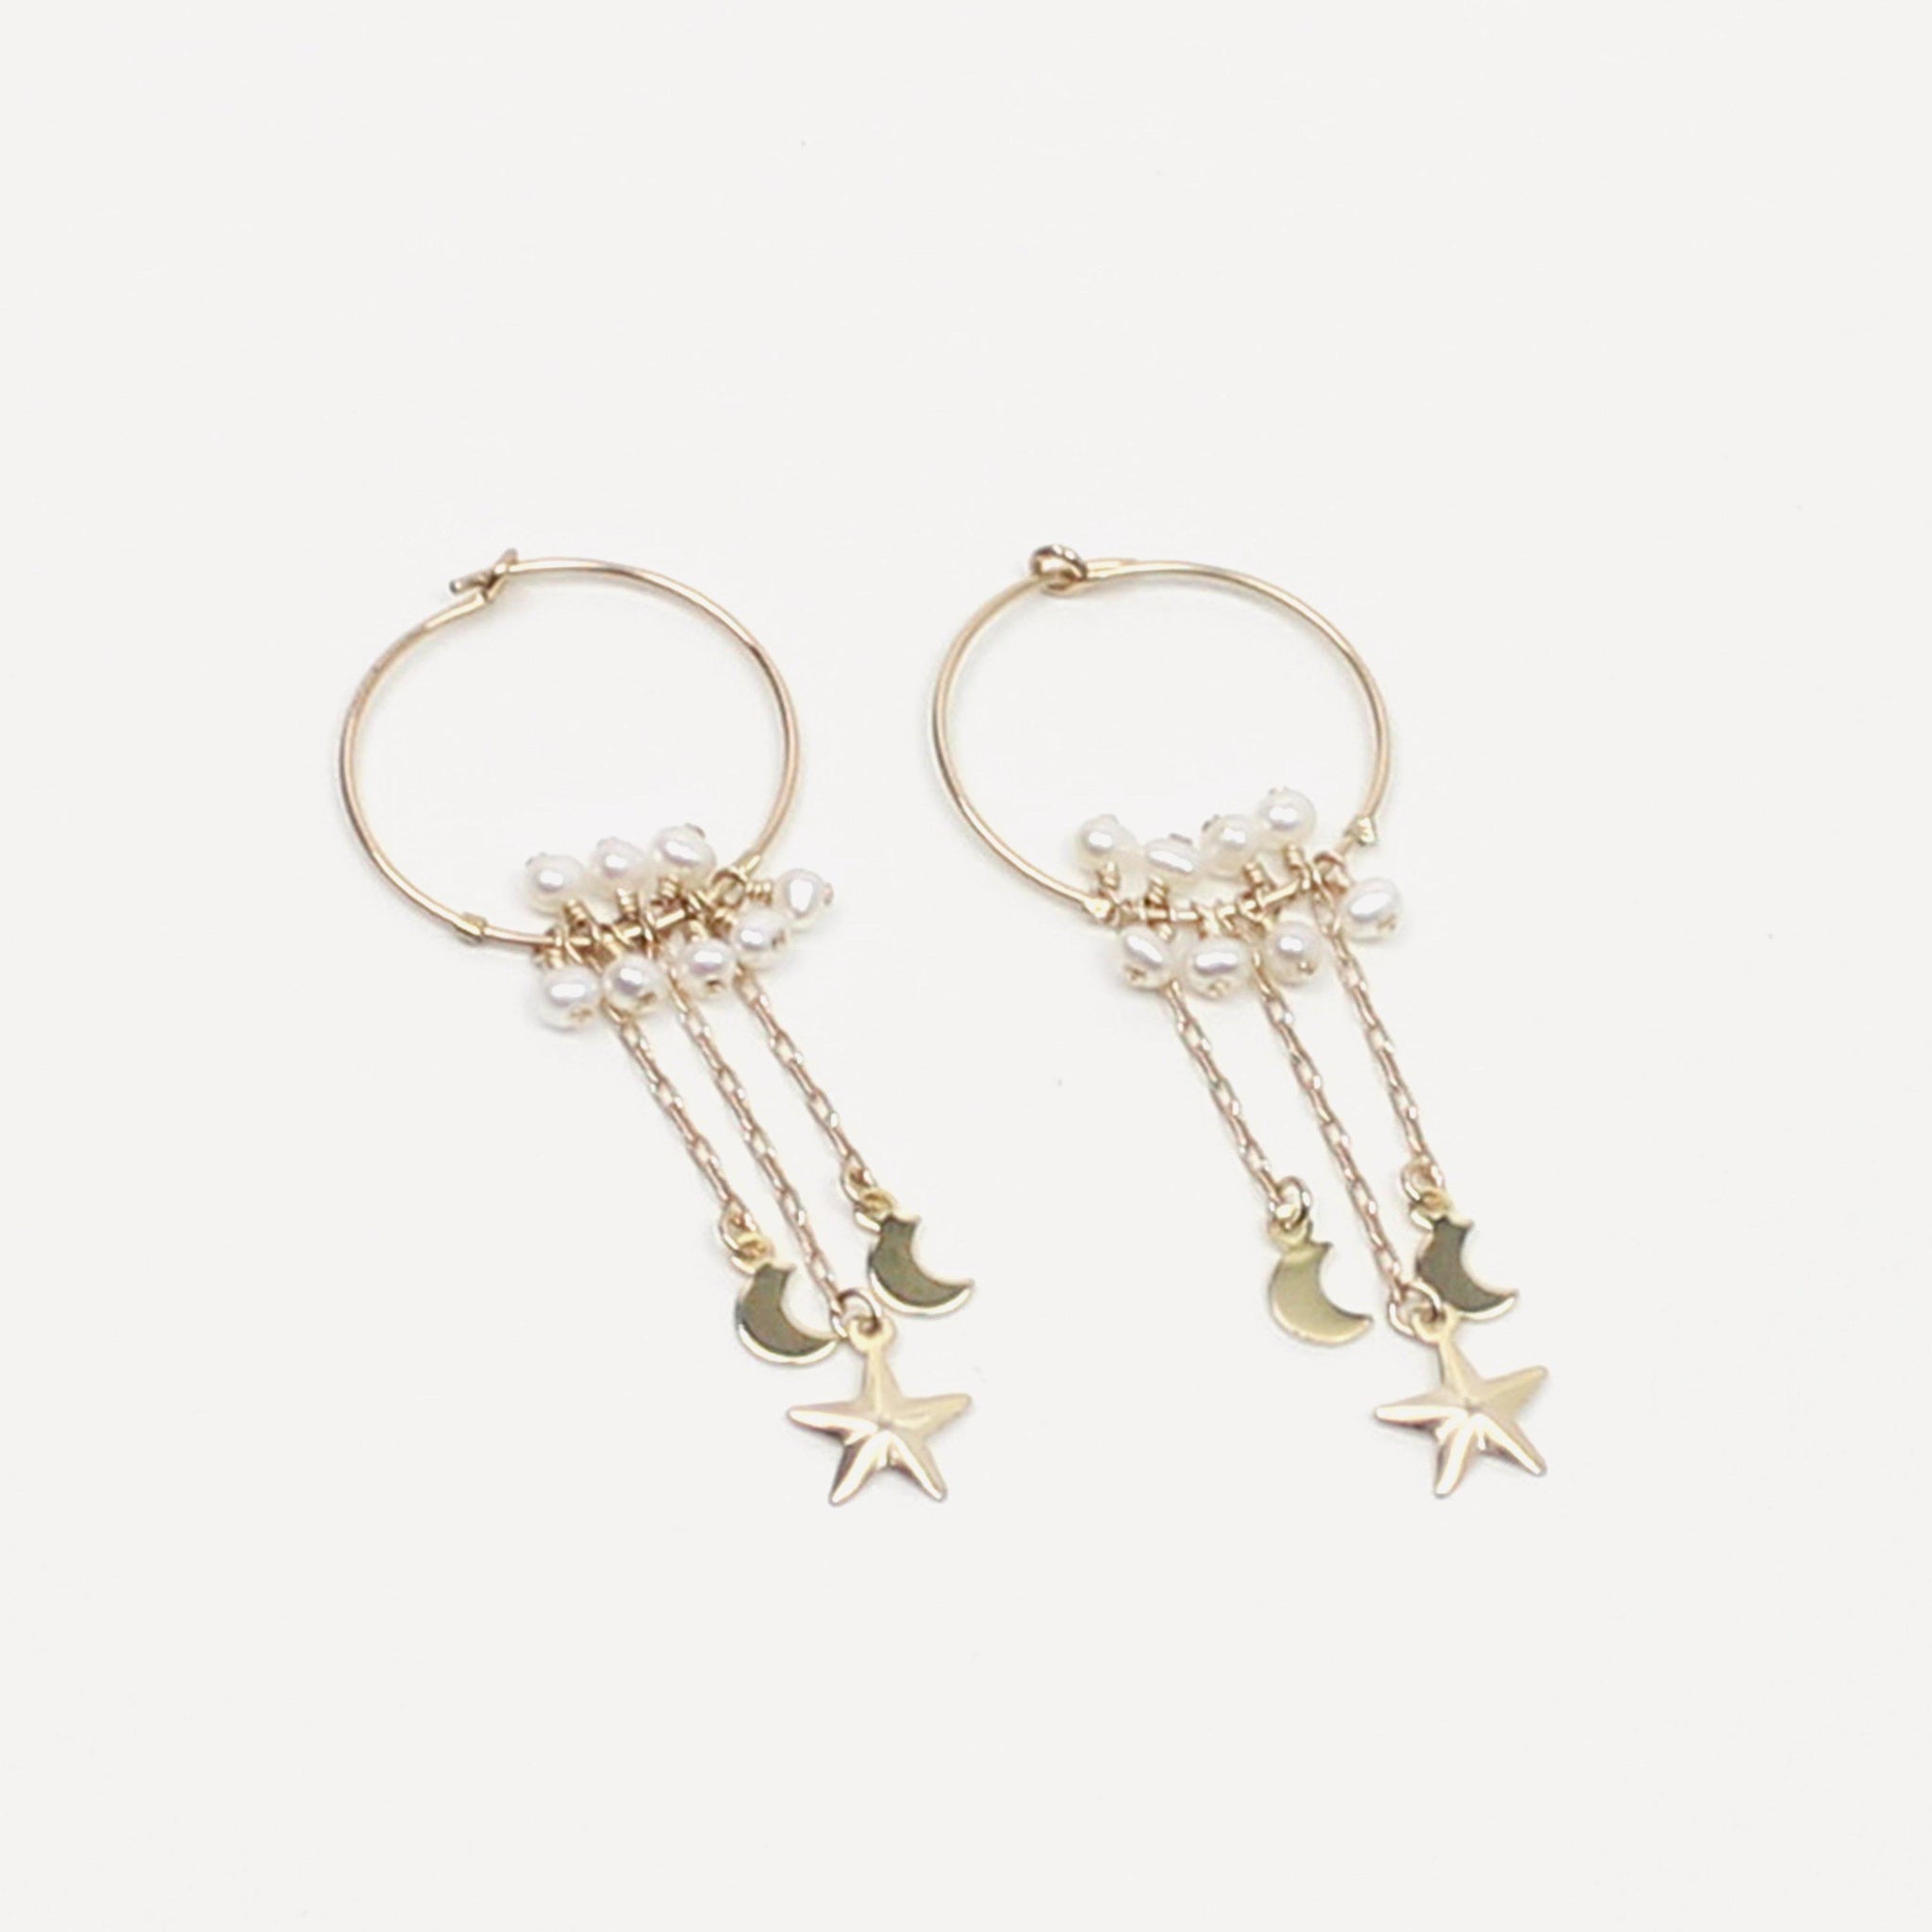 All that Moon and Star Earring-Adorn Earring-La Meno